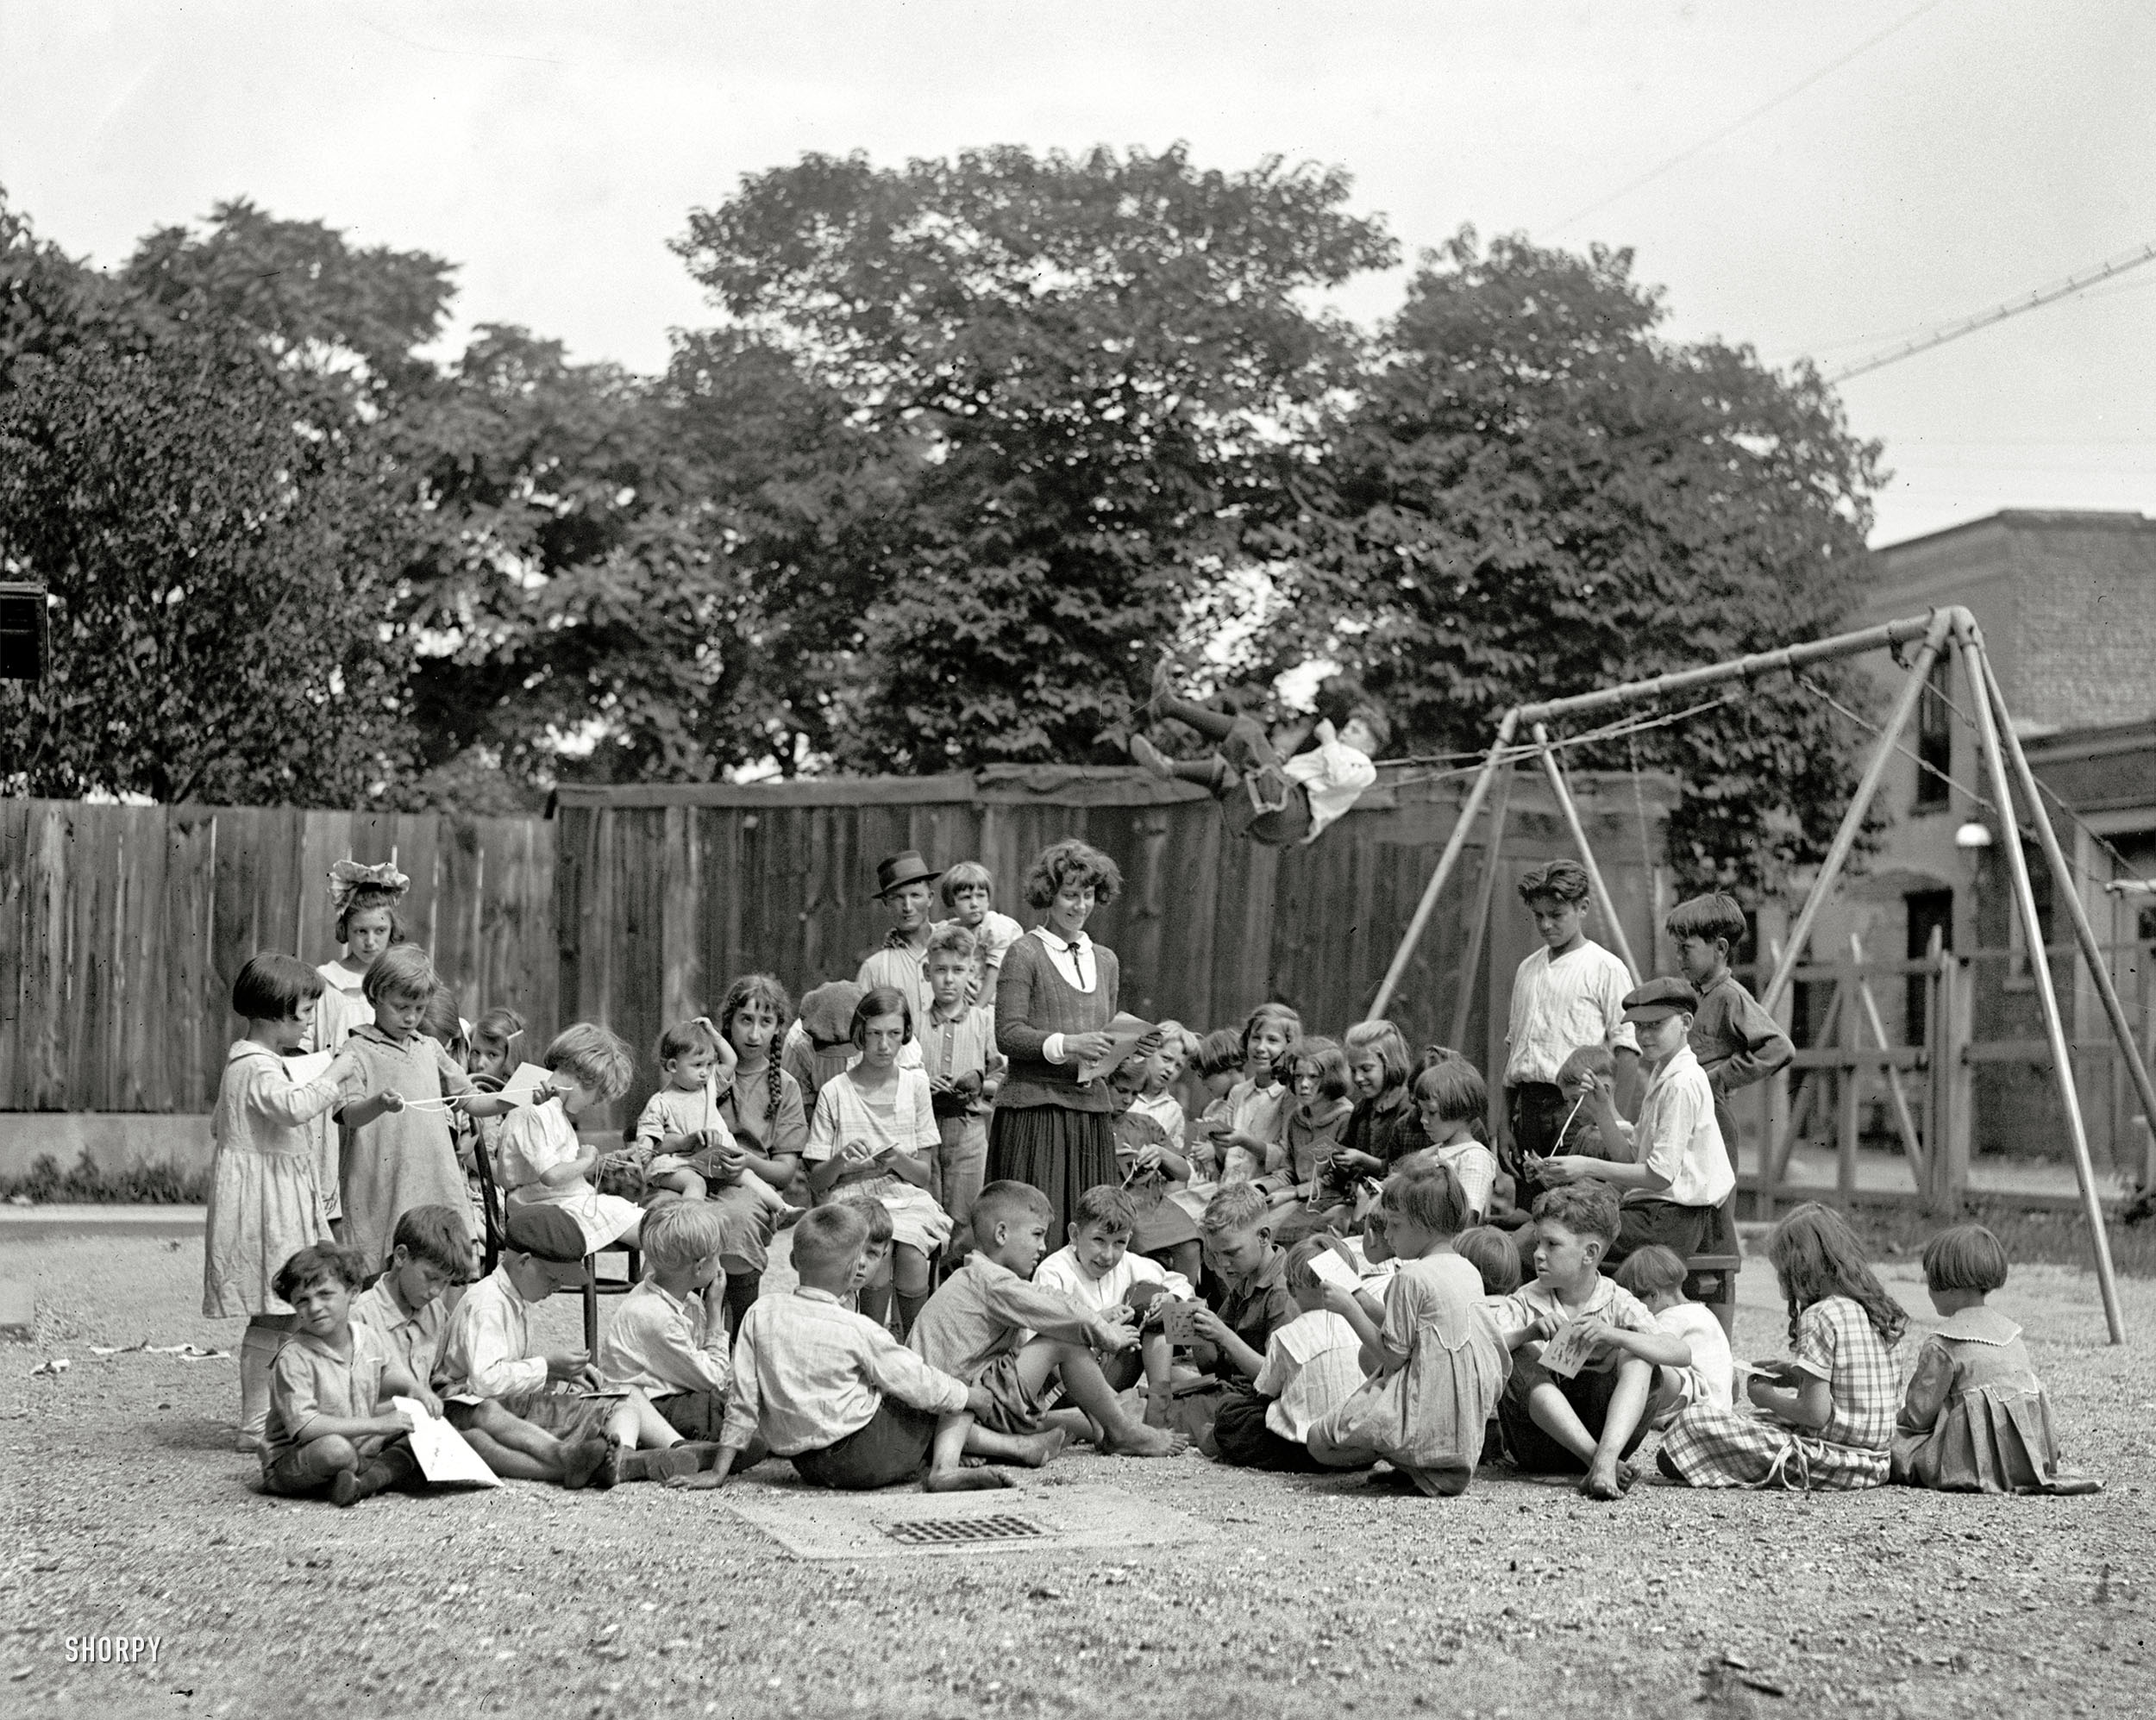 Washington, D.C., 1922. "Fair Bros. playground." The Little Rascals. National Photo Company Collection glass negative. View full size.